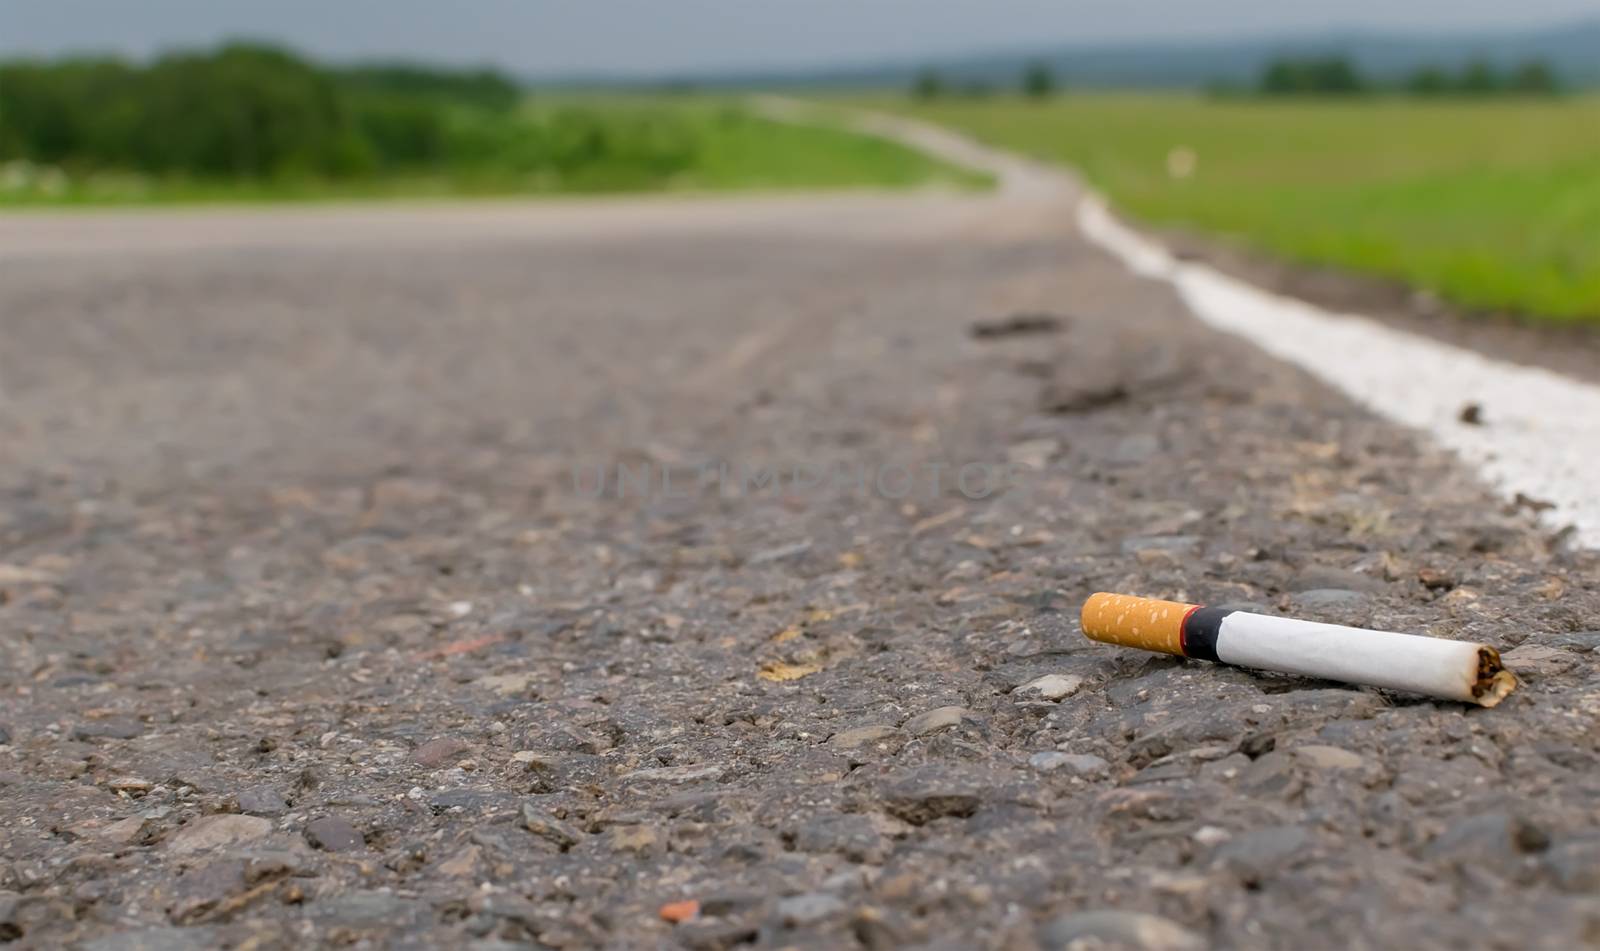 View of cigarette lying on the asphalt on a country road in the cloudy weather